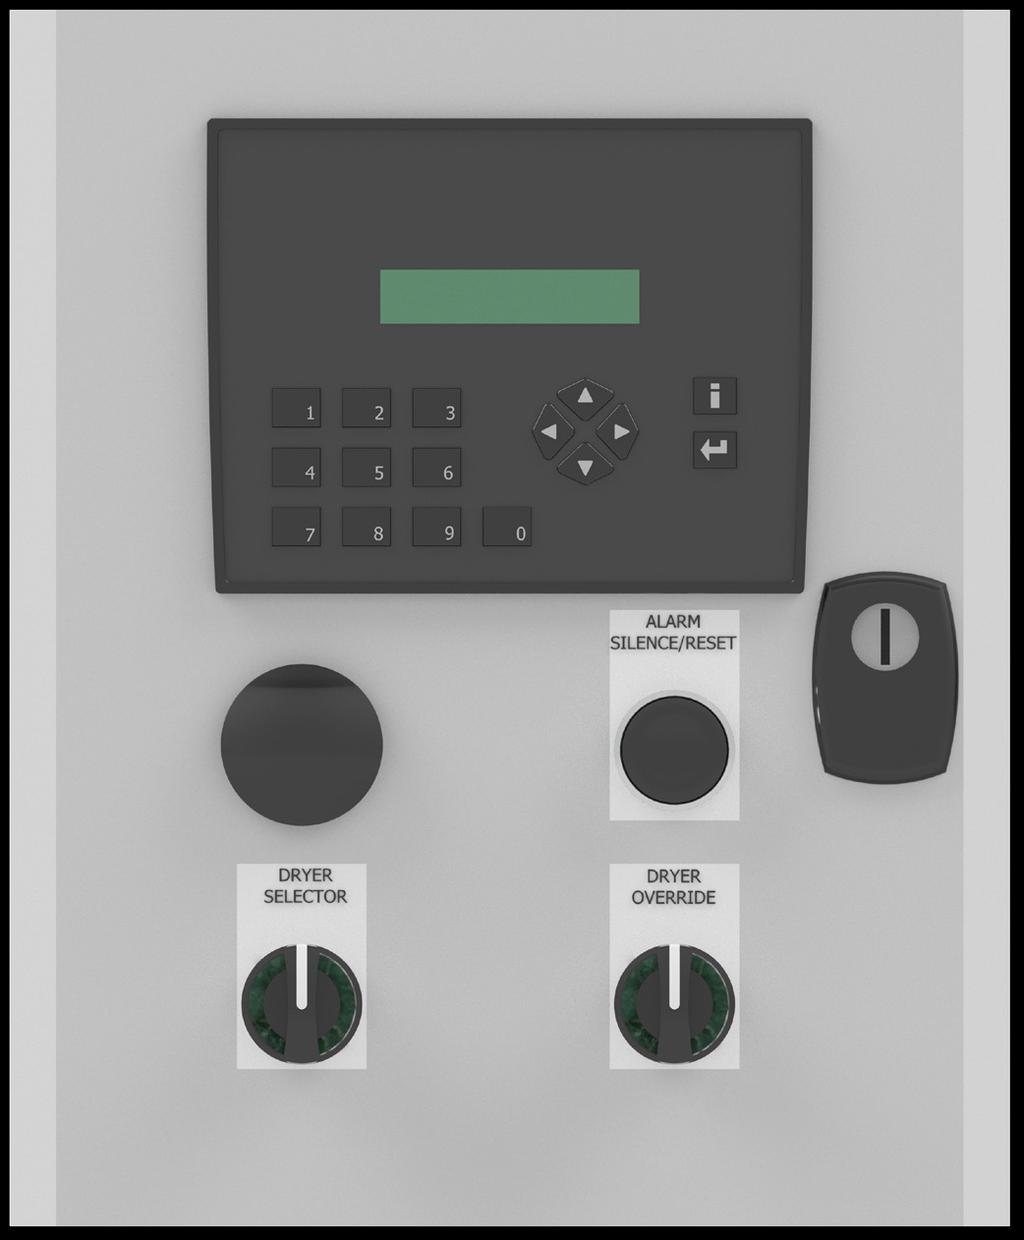 Value Panel 1 2 3 4 5 6 1. Display Screen Displays the systems operating screens. 2. Keypad Entry Used to move though operating screens and input data. 3. Alarm Horn Sounds when an alarm condition occurs.